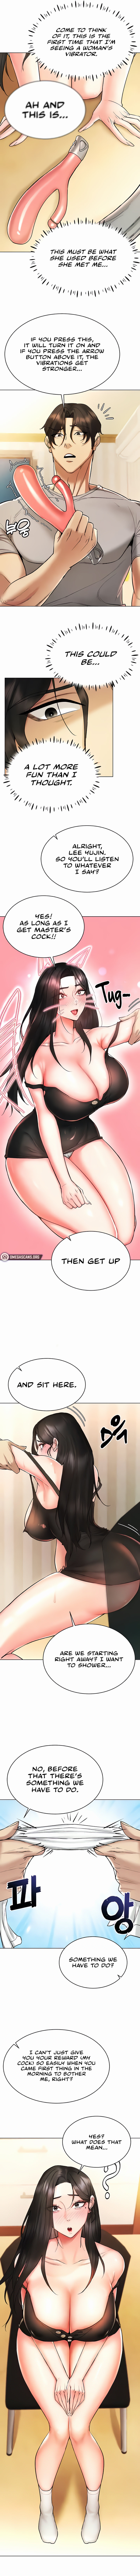 Using Eroge Abilities In Real Life - Chapter 8 Page 7